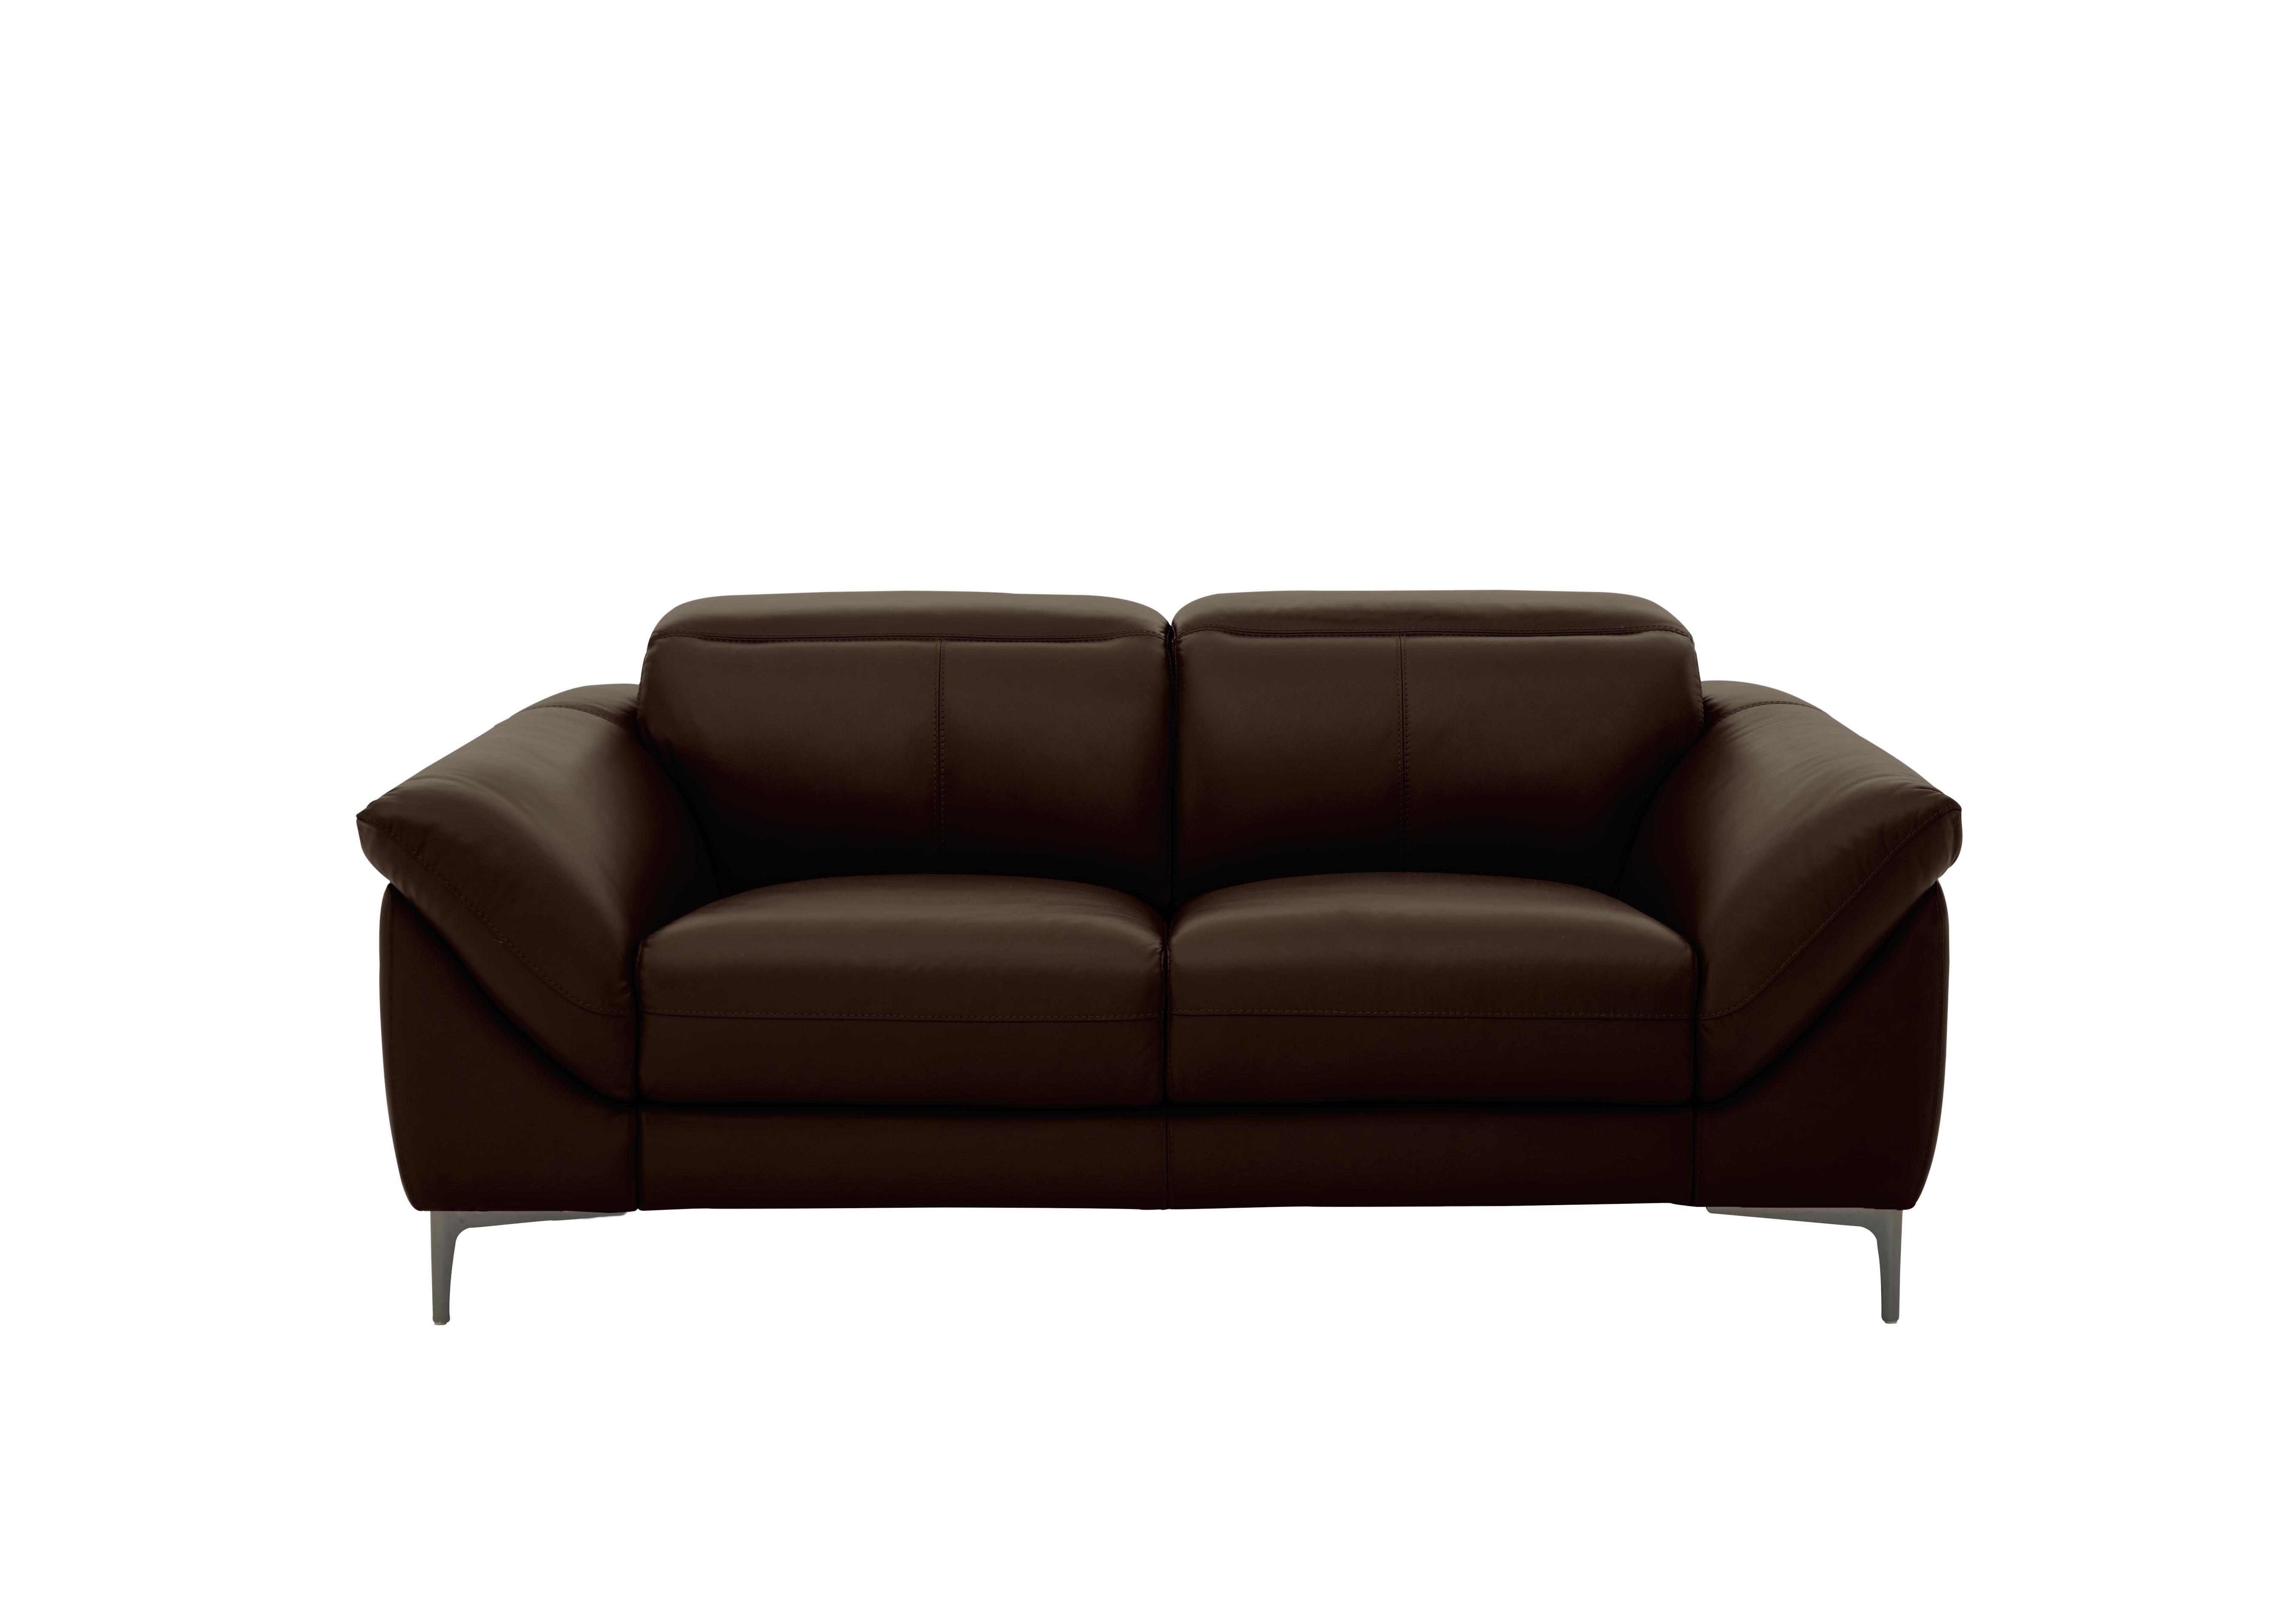 Best Of 76+ Awe-inspiring galaxy leather sofa reviews Top Choices Of Architects